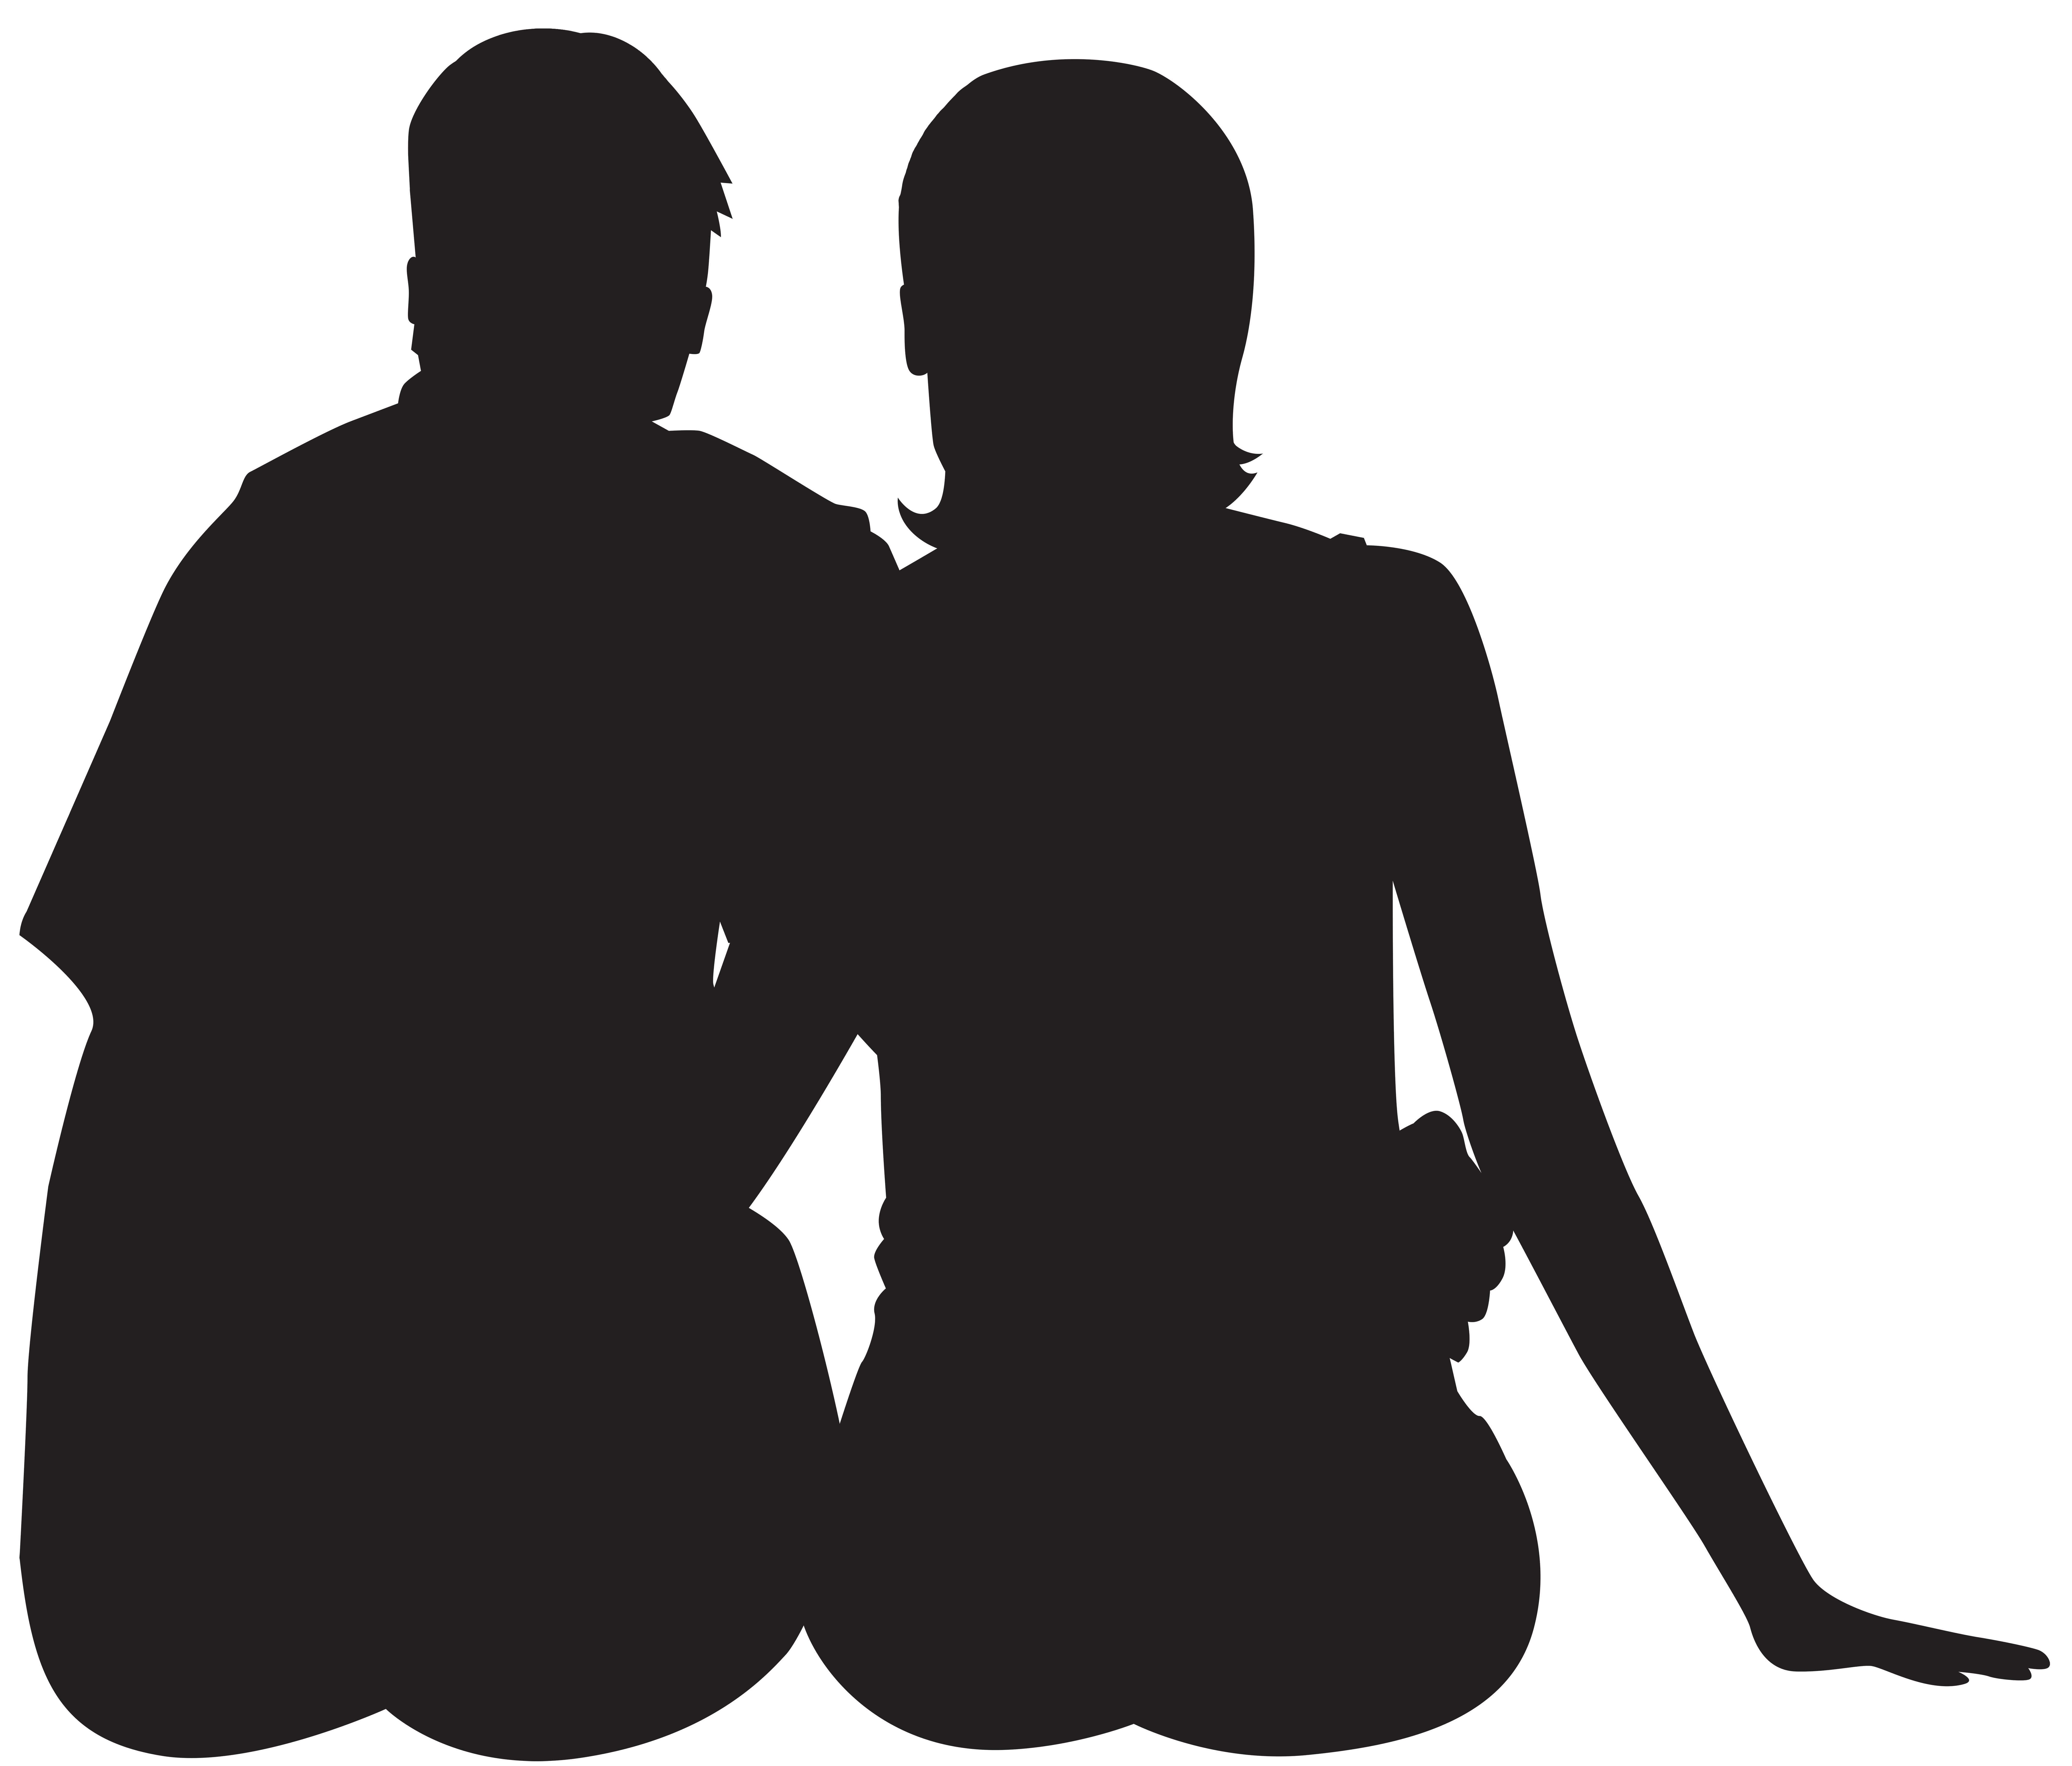 Sitting Couple Silhouette PNG Clip Art Image.